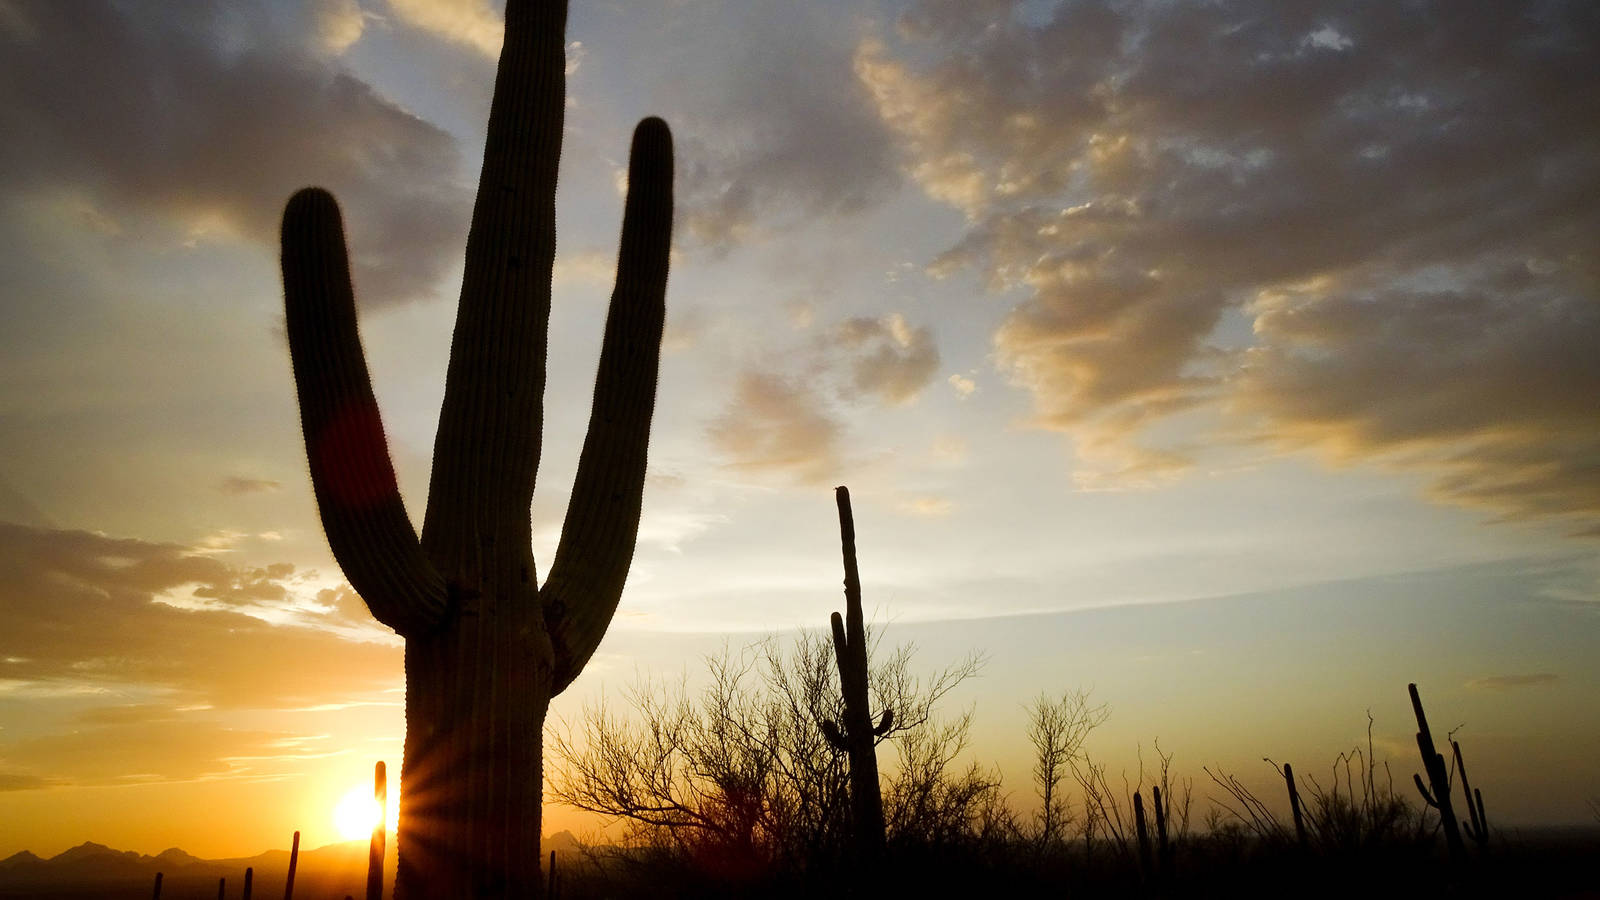 Saving the West's most iconic cactus from climate change